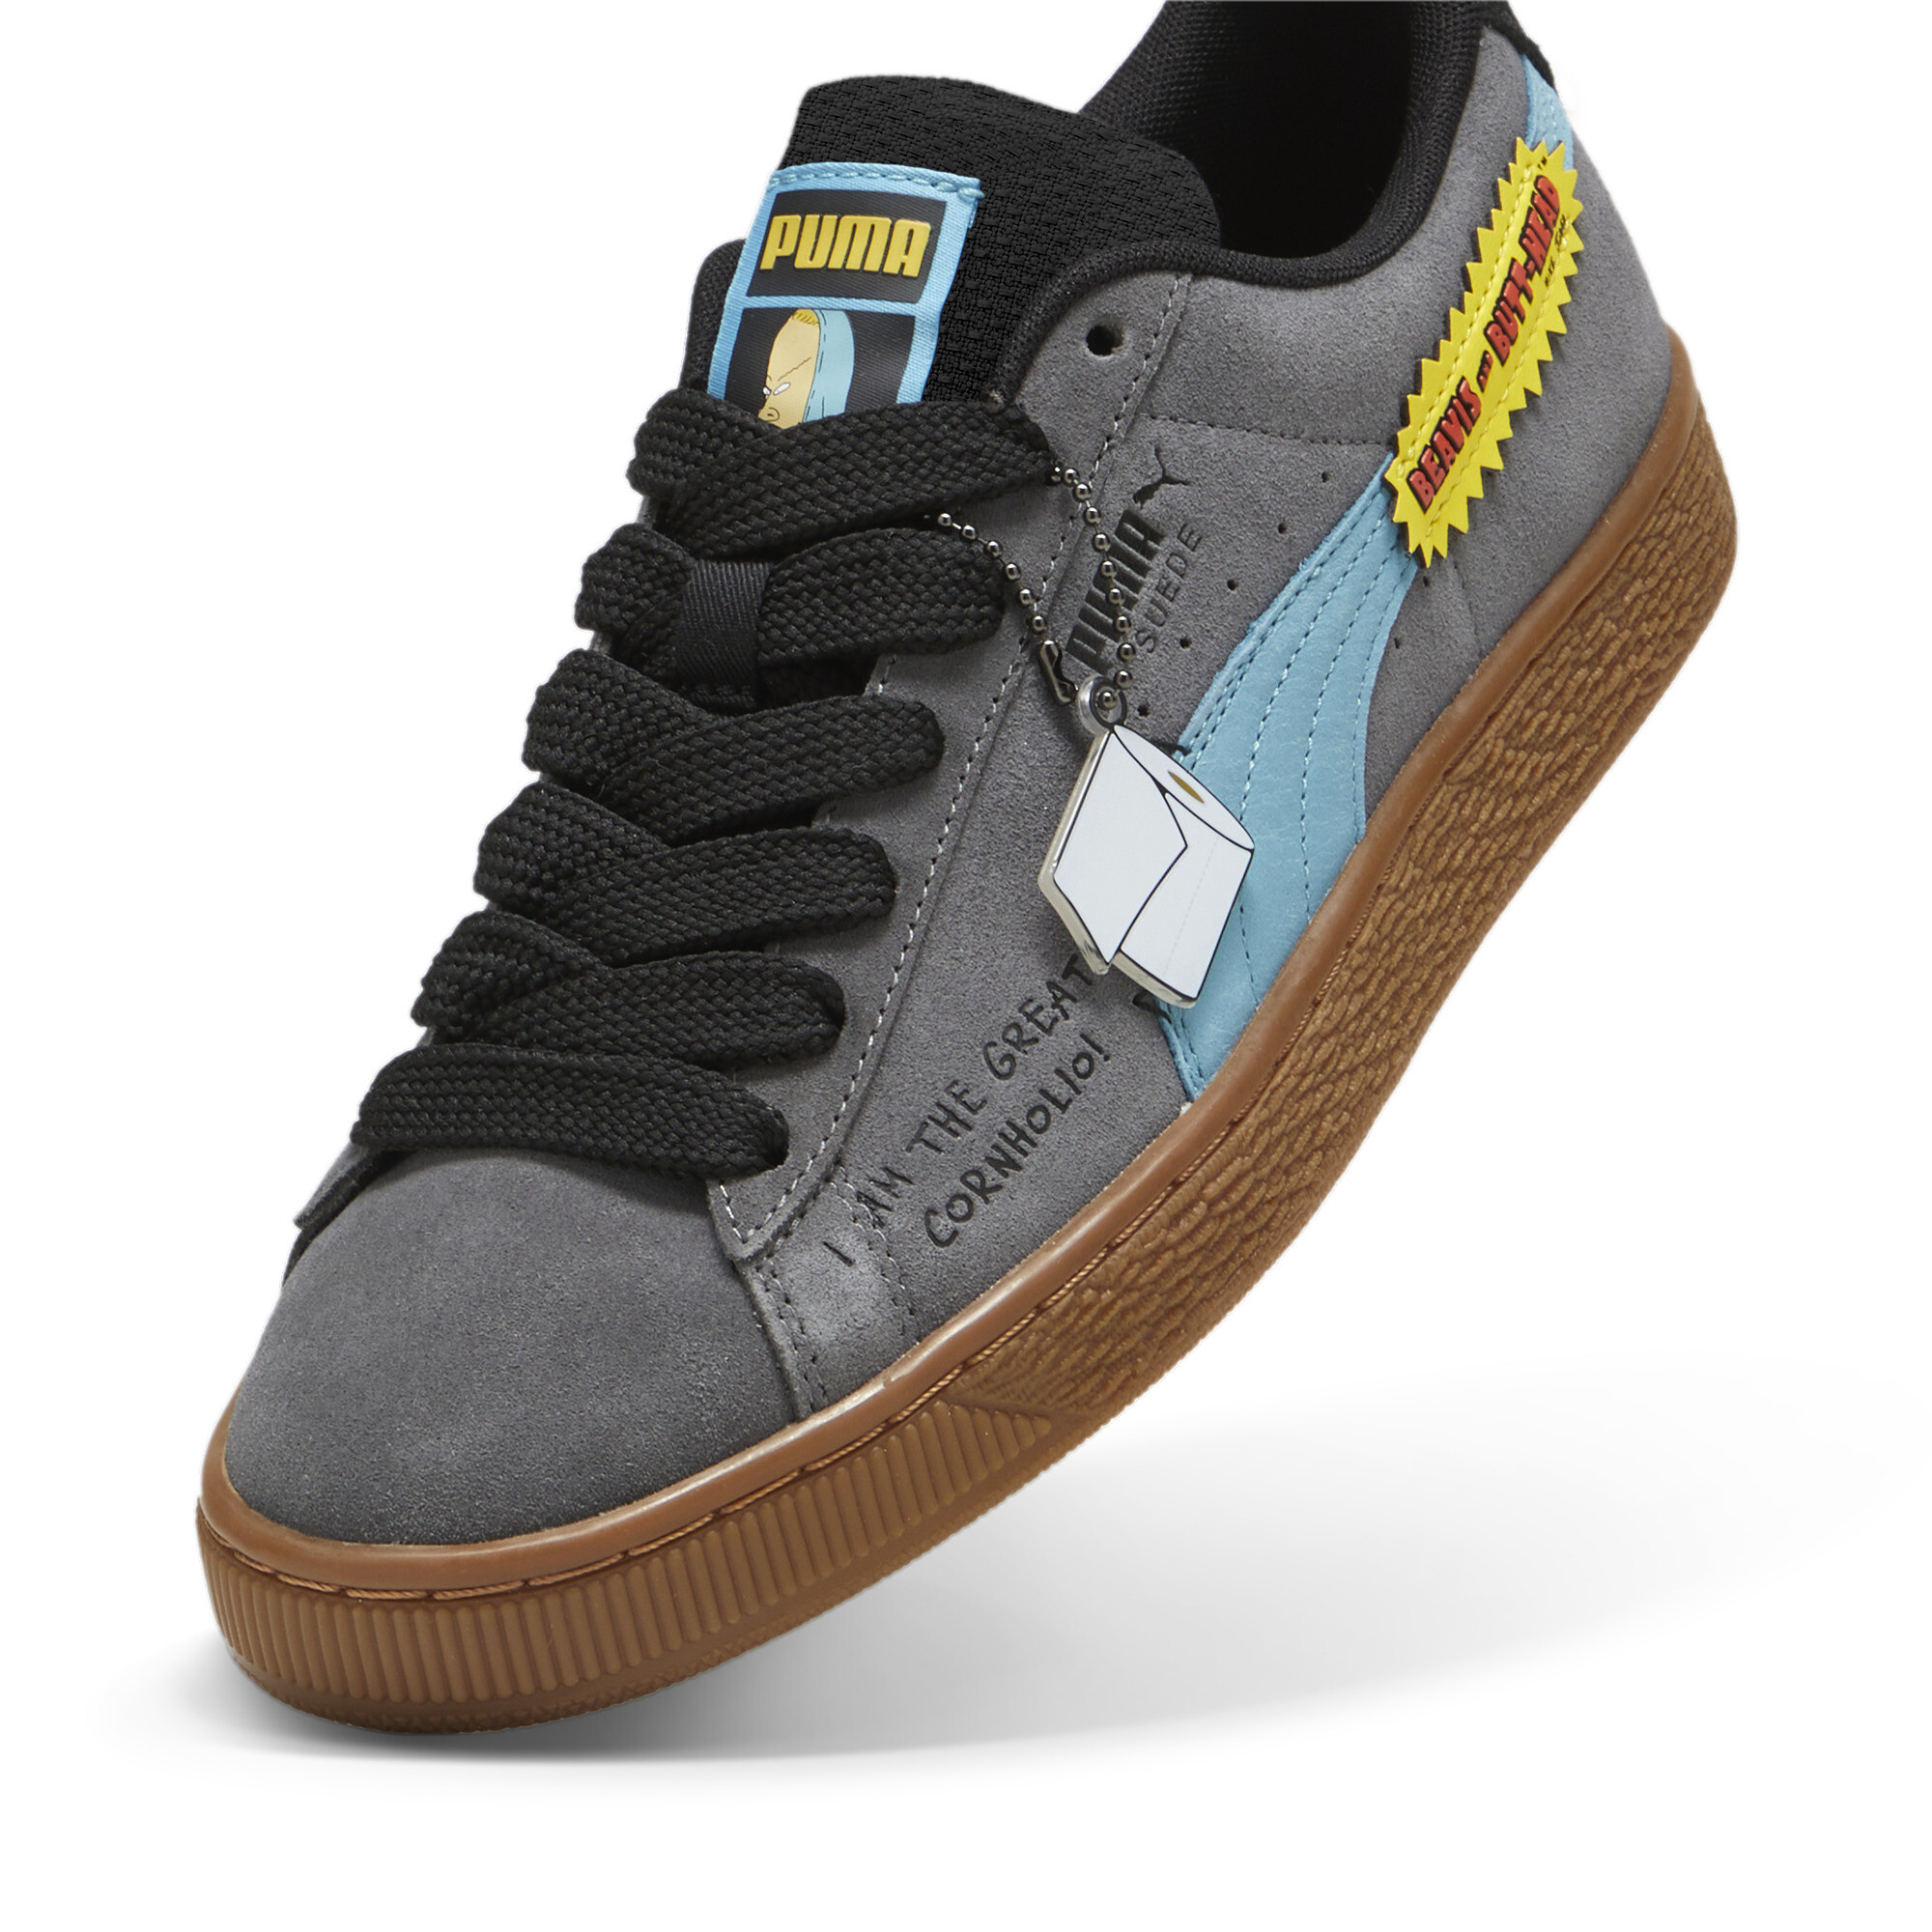 Kids' PUMA X BEAVIS AND BUTTHEAD Suede Sneakers In Gray, Size EU 46